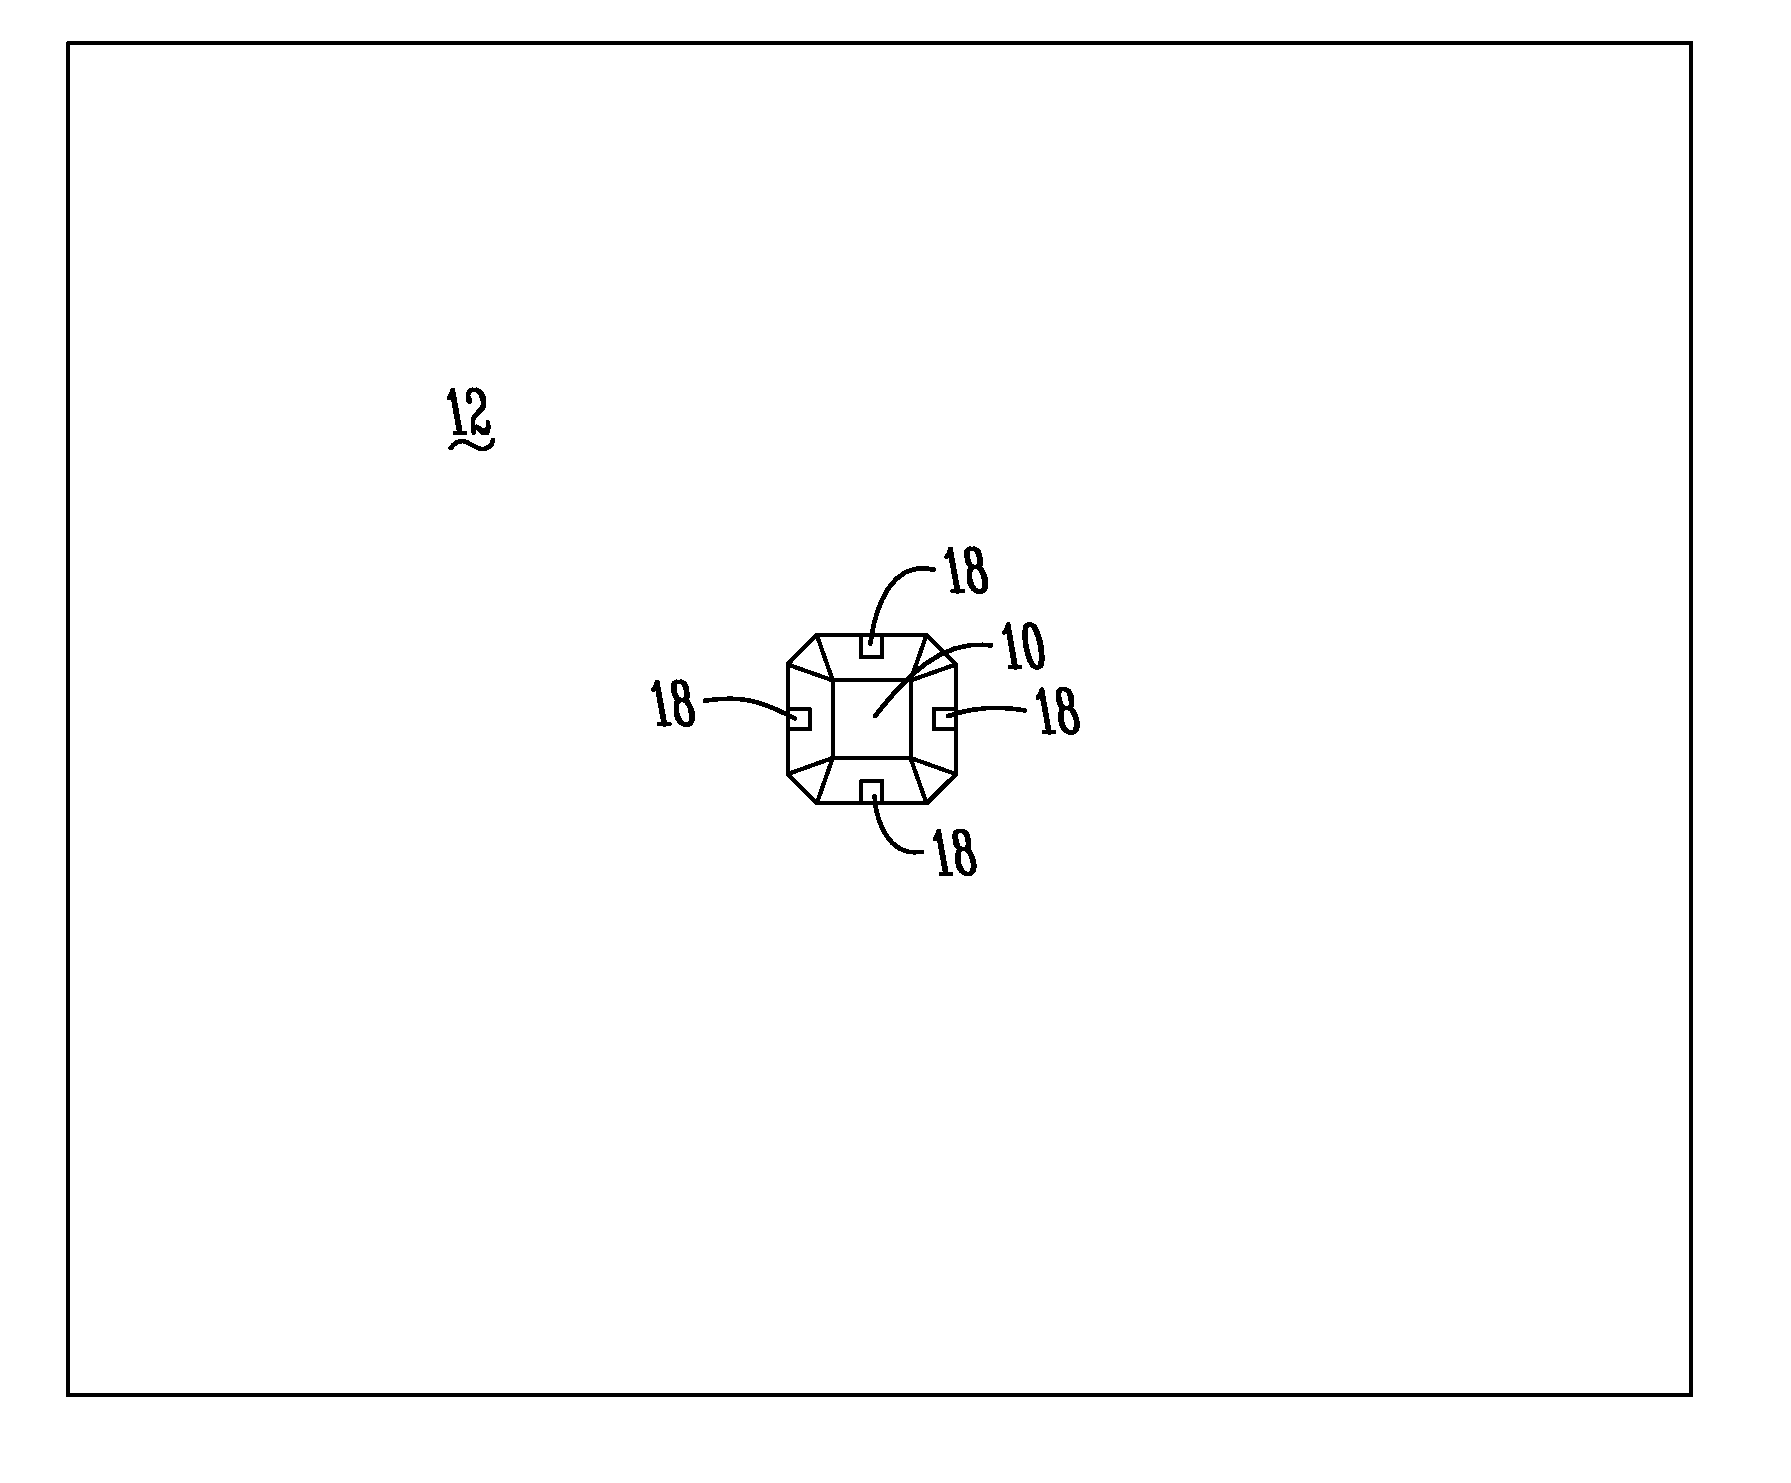 Method and apparatus for embedding ornamental objects into sheet material